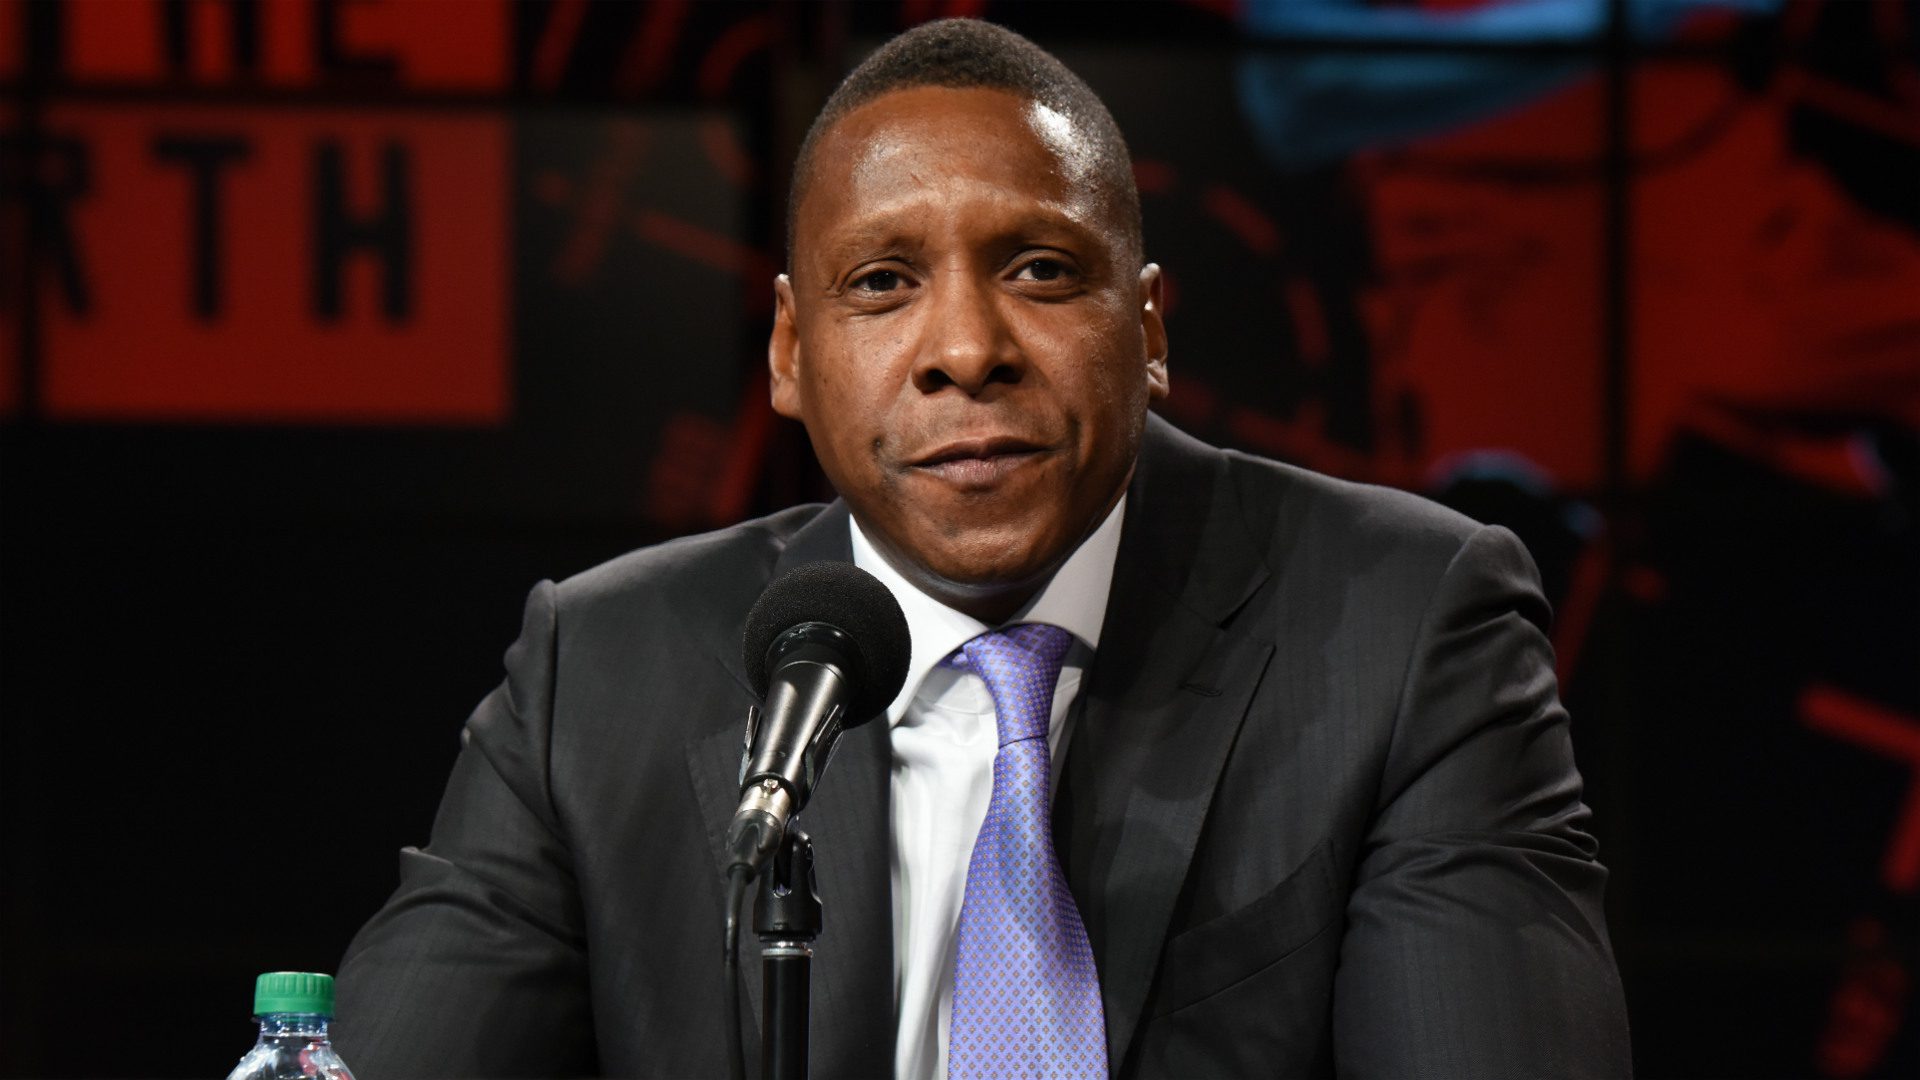 Masai Ujiri Inks New Deal With Raptors; Moved Up to Vice Chairman